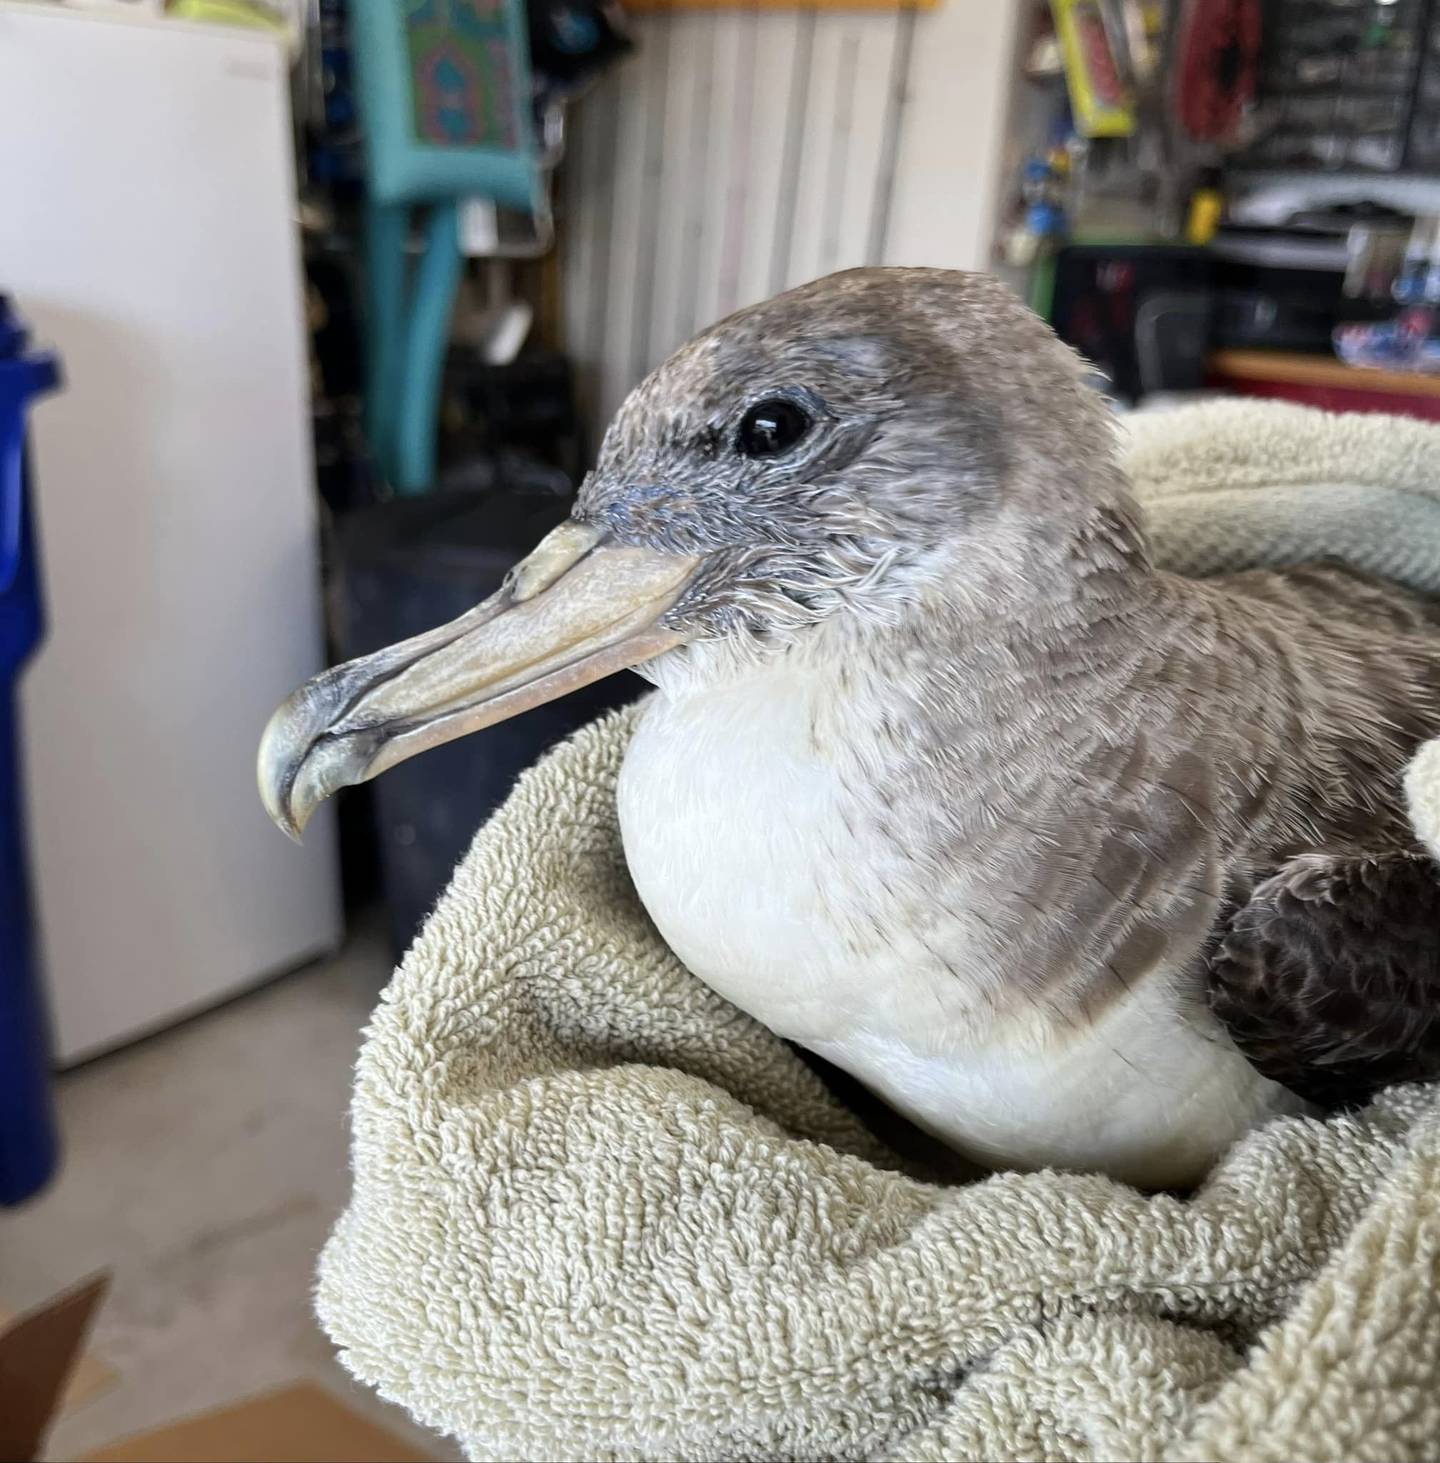 A shorebird biologist has concluded the birds are dying from migratory and wind-related stress and exhaustion.